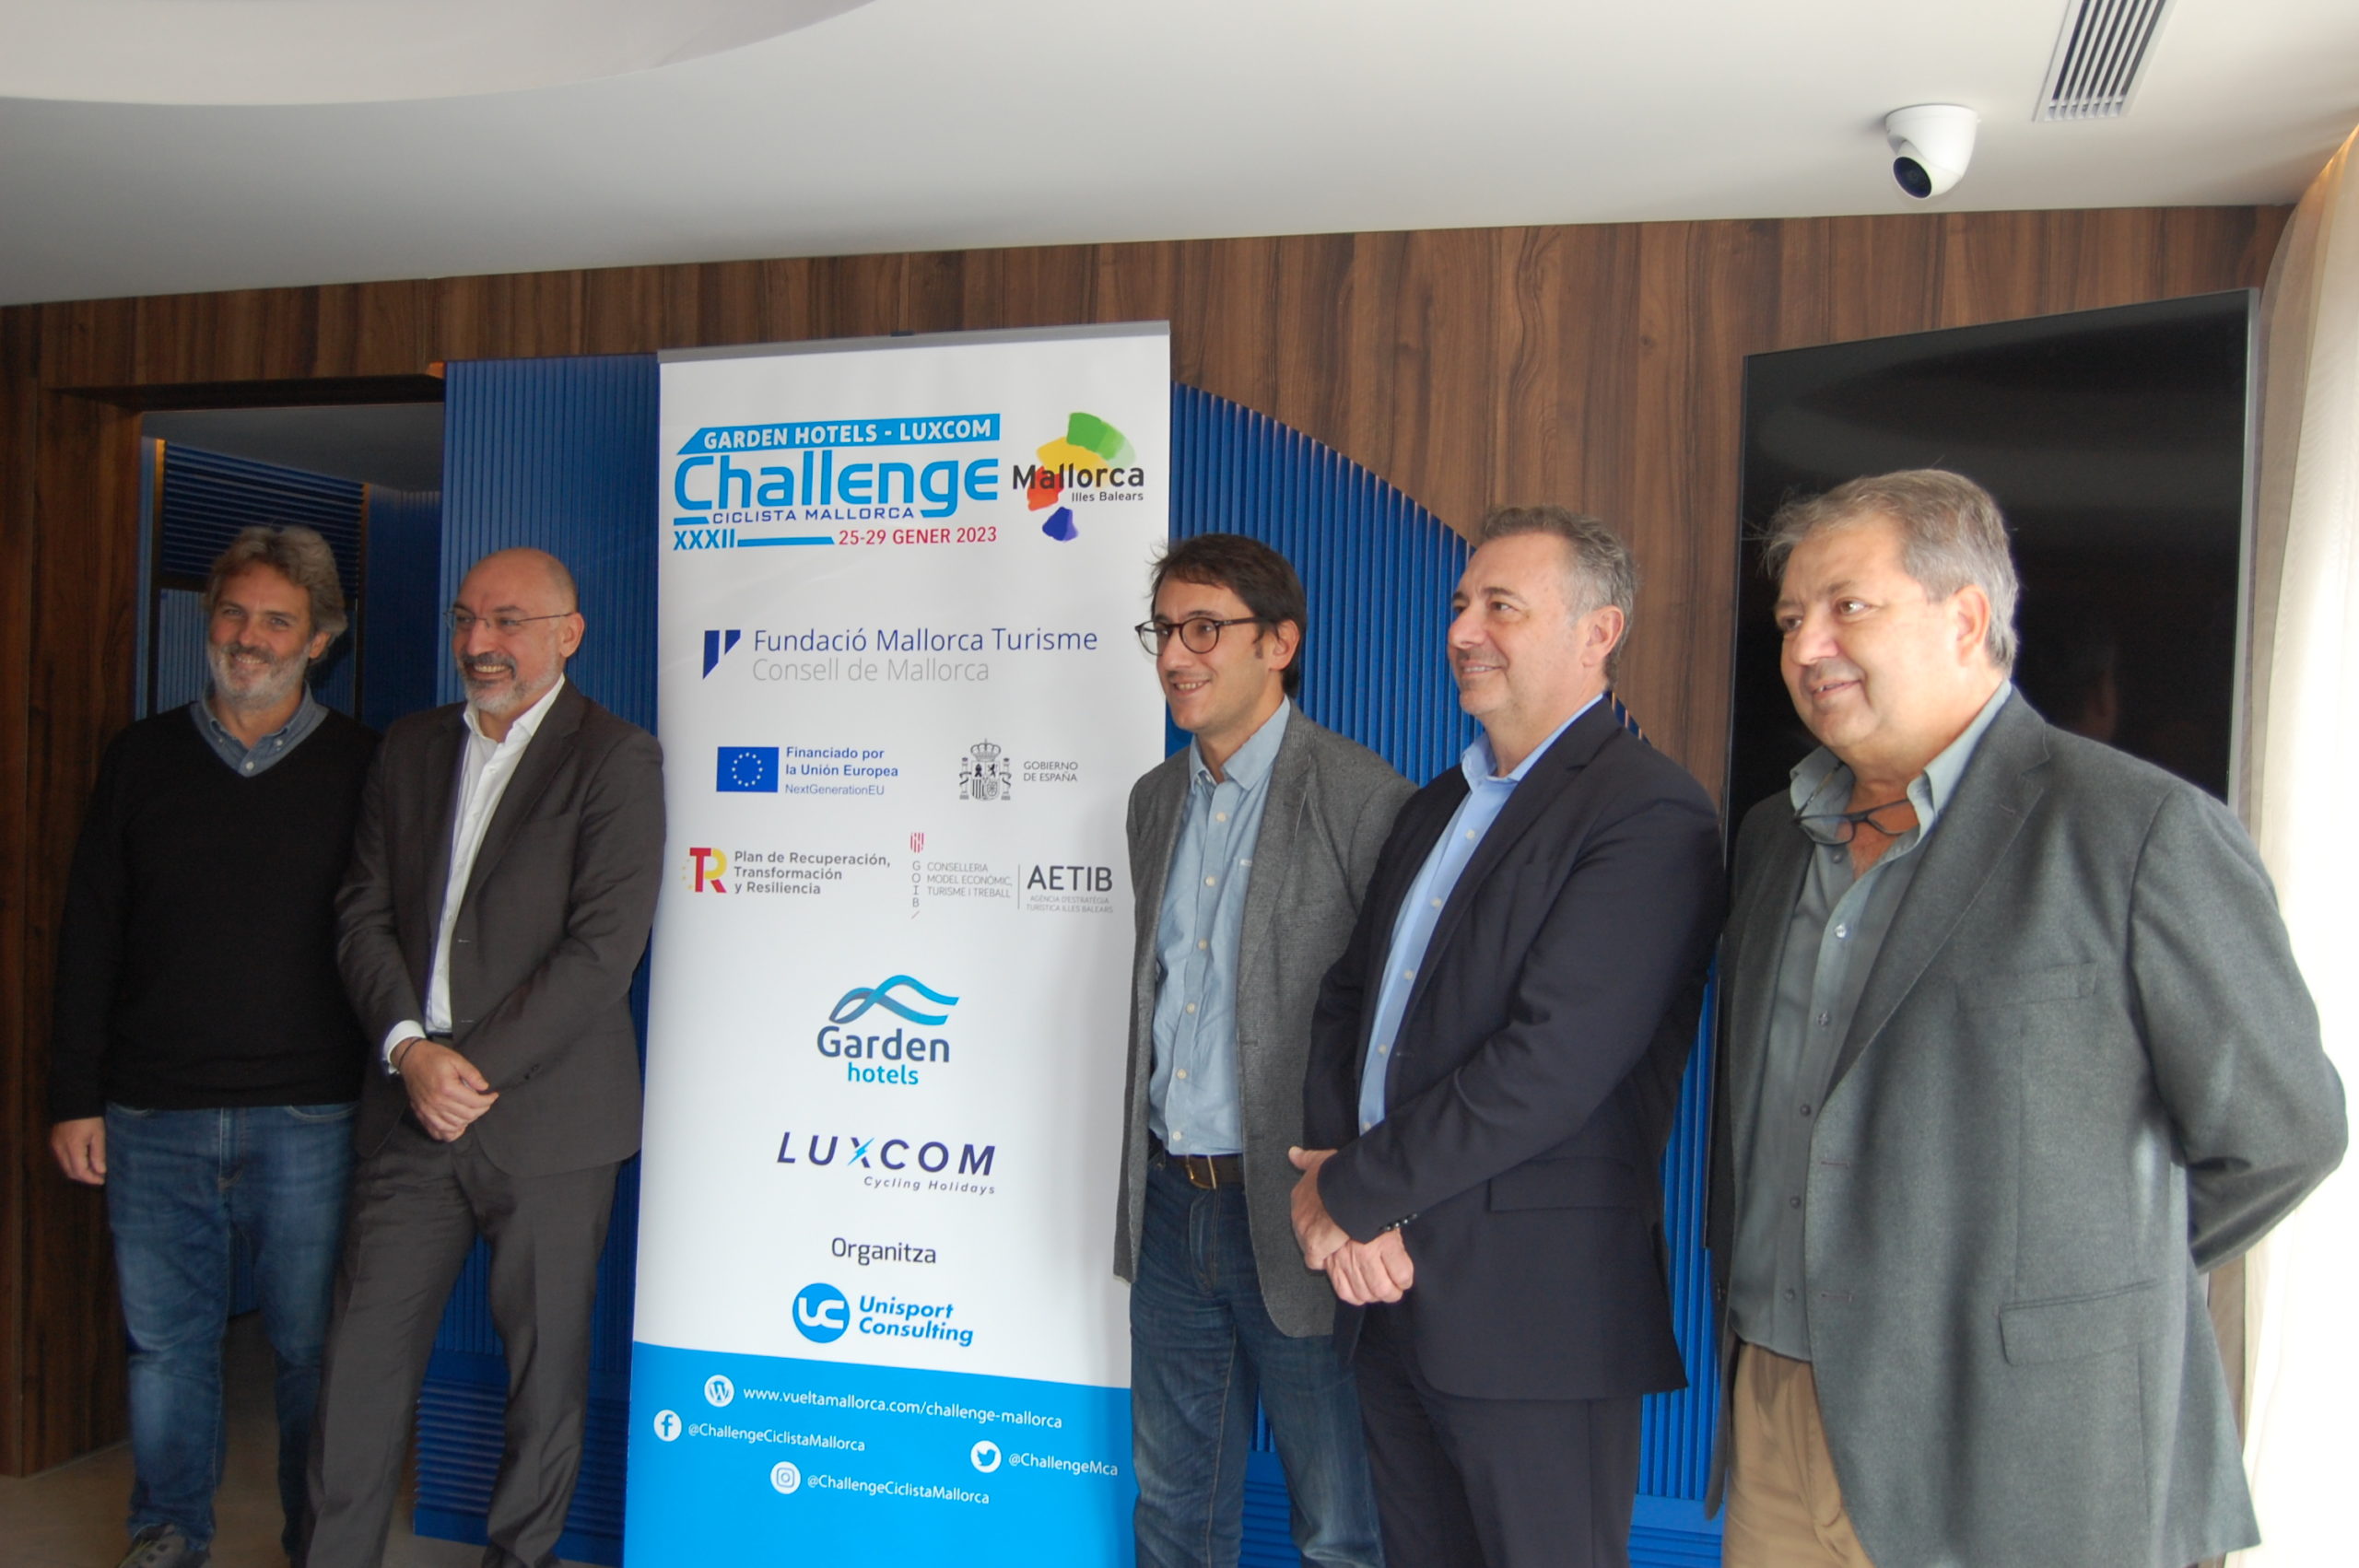 Live television returns to the Mallorca Cycling Challenge and Garden Hotels will continue as main sponsor